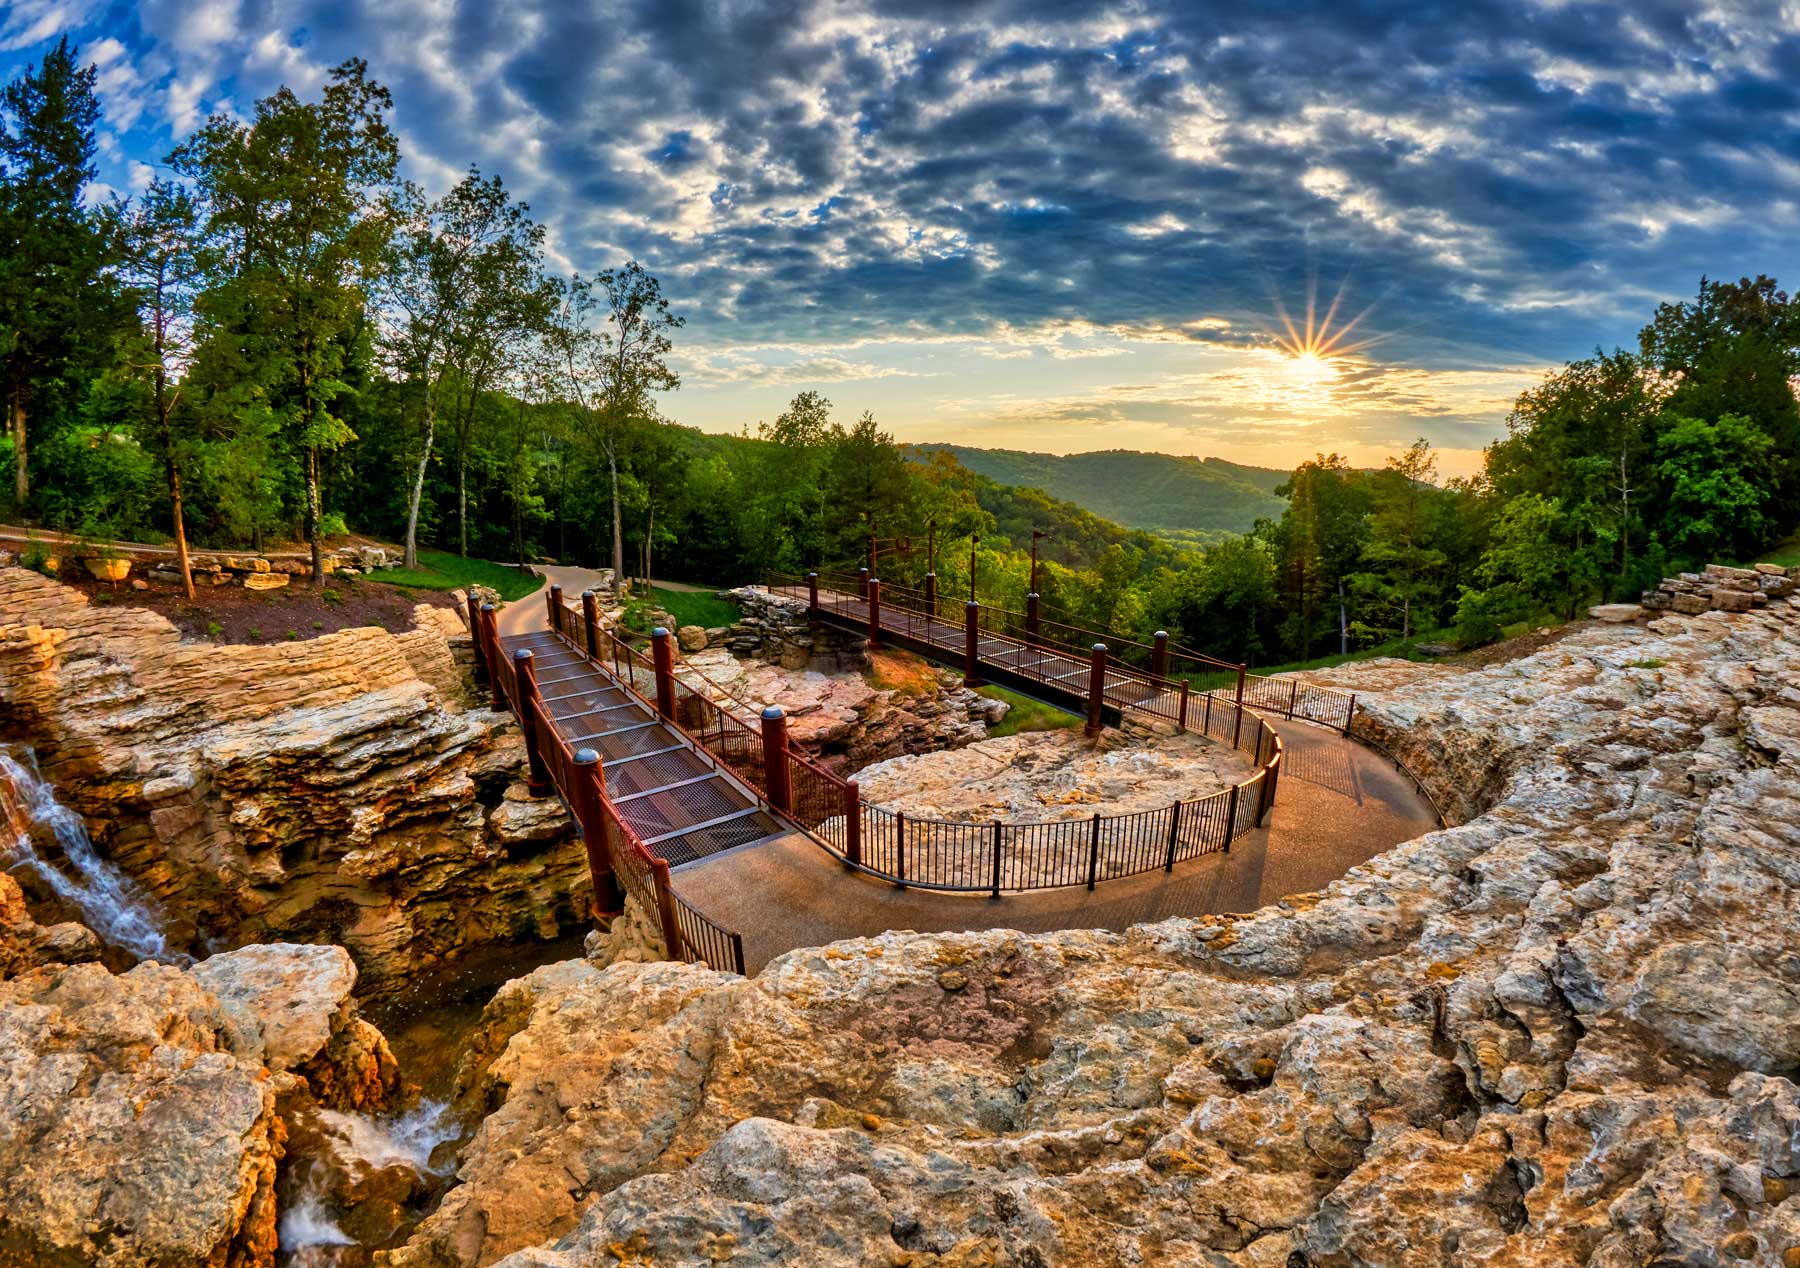 Cave trail carved out of the rock in the Ozark Mountains with vivid sky and sunset